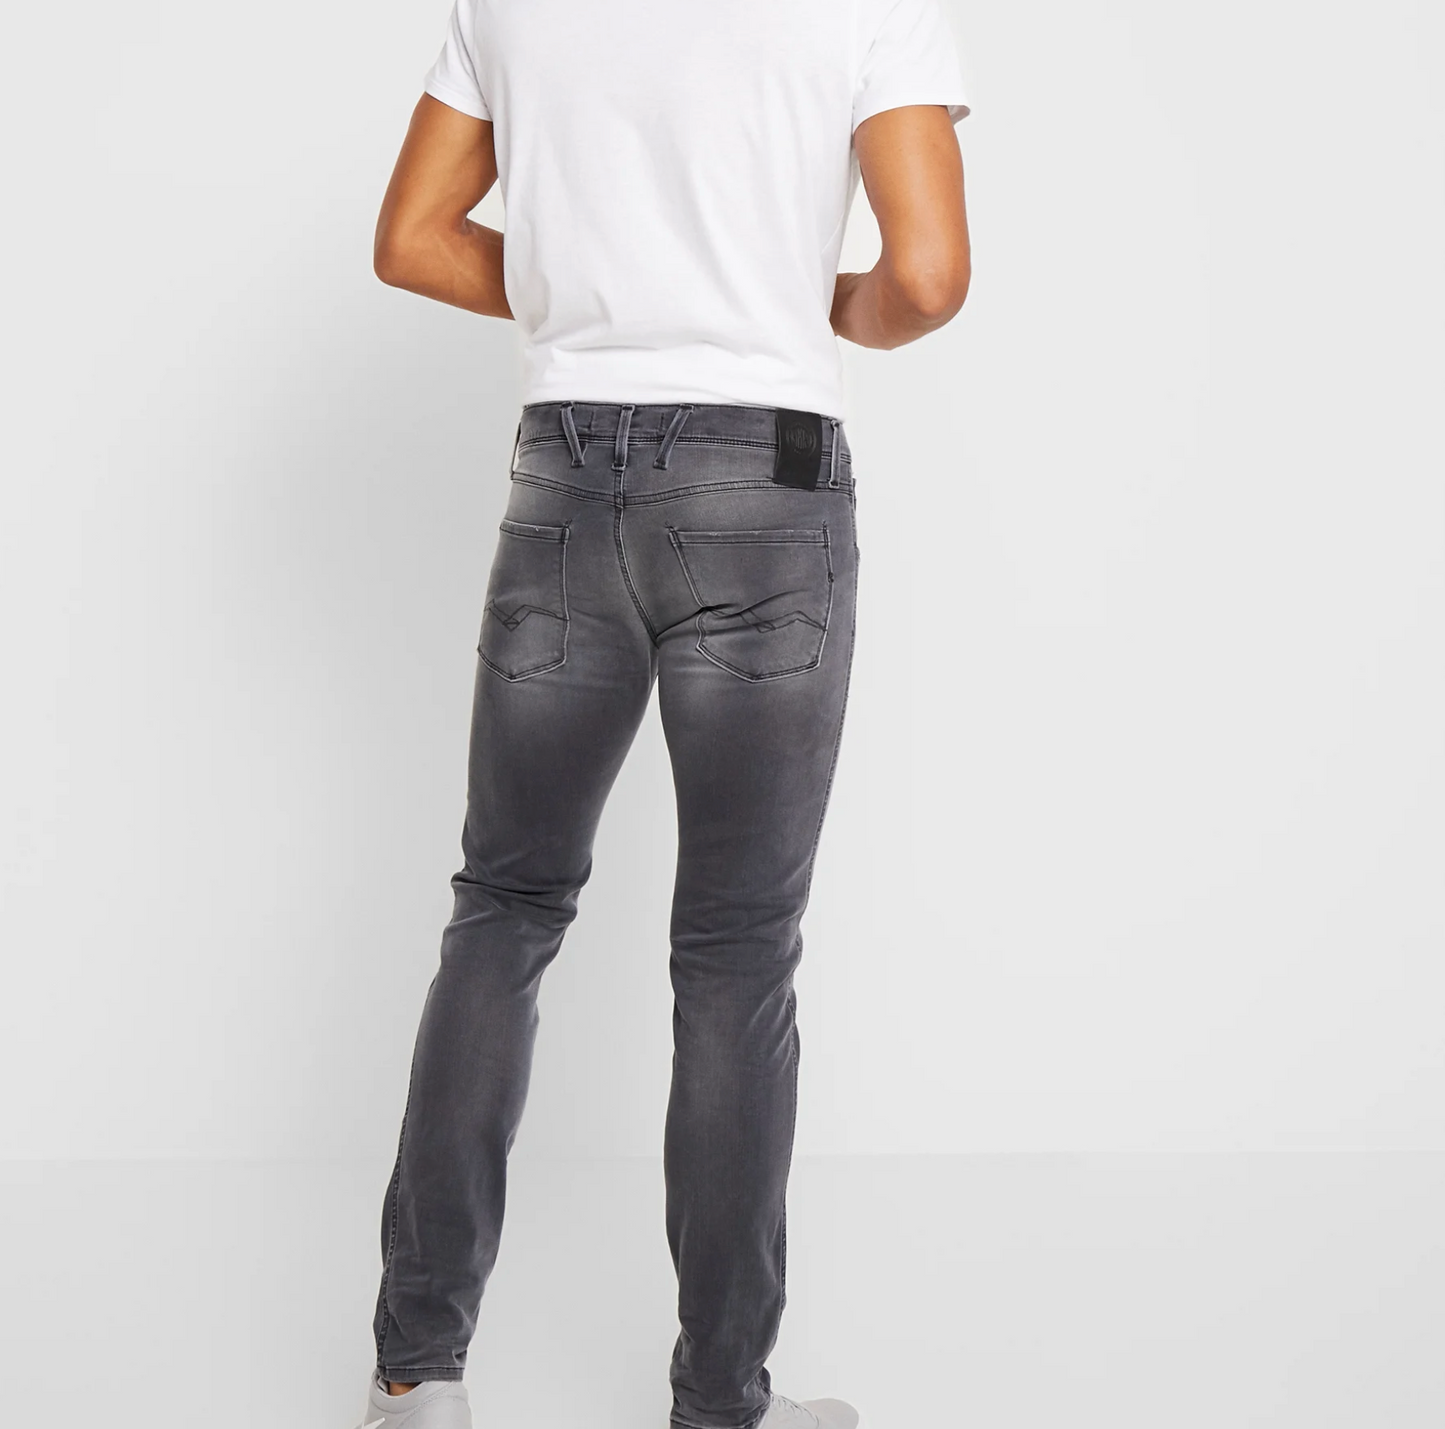 Replay Slim Fit Hyperflex Re-Used Anbass Jeans - Grey (White Shades)